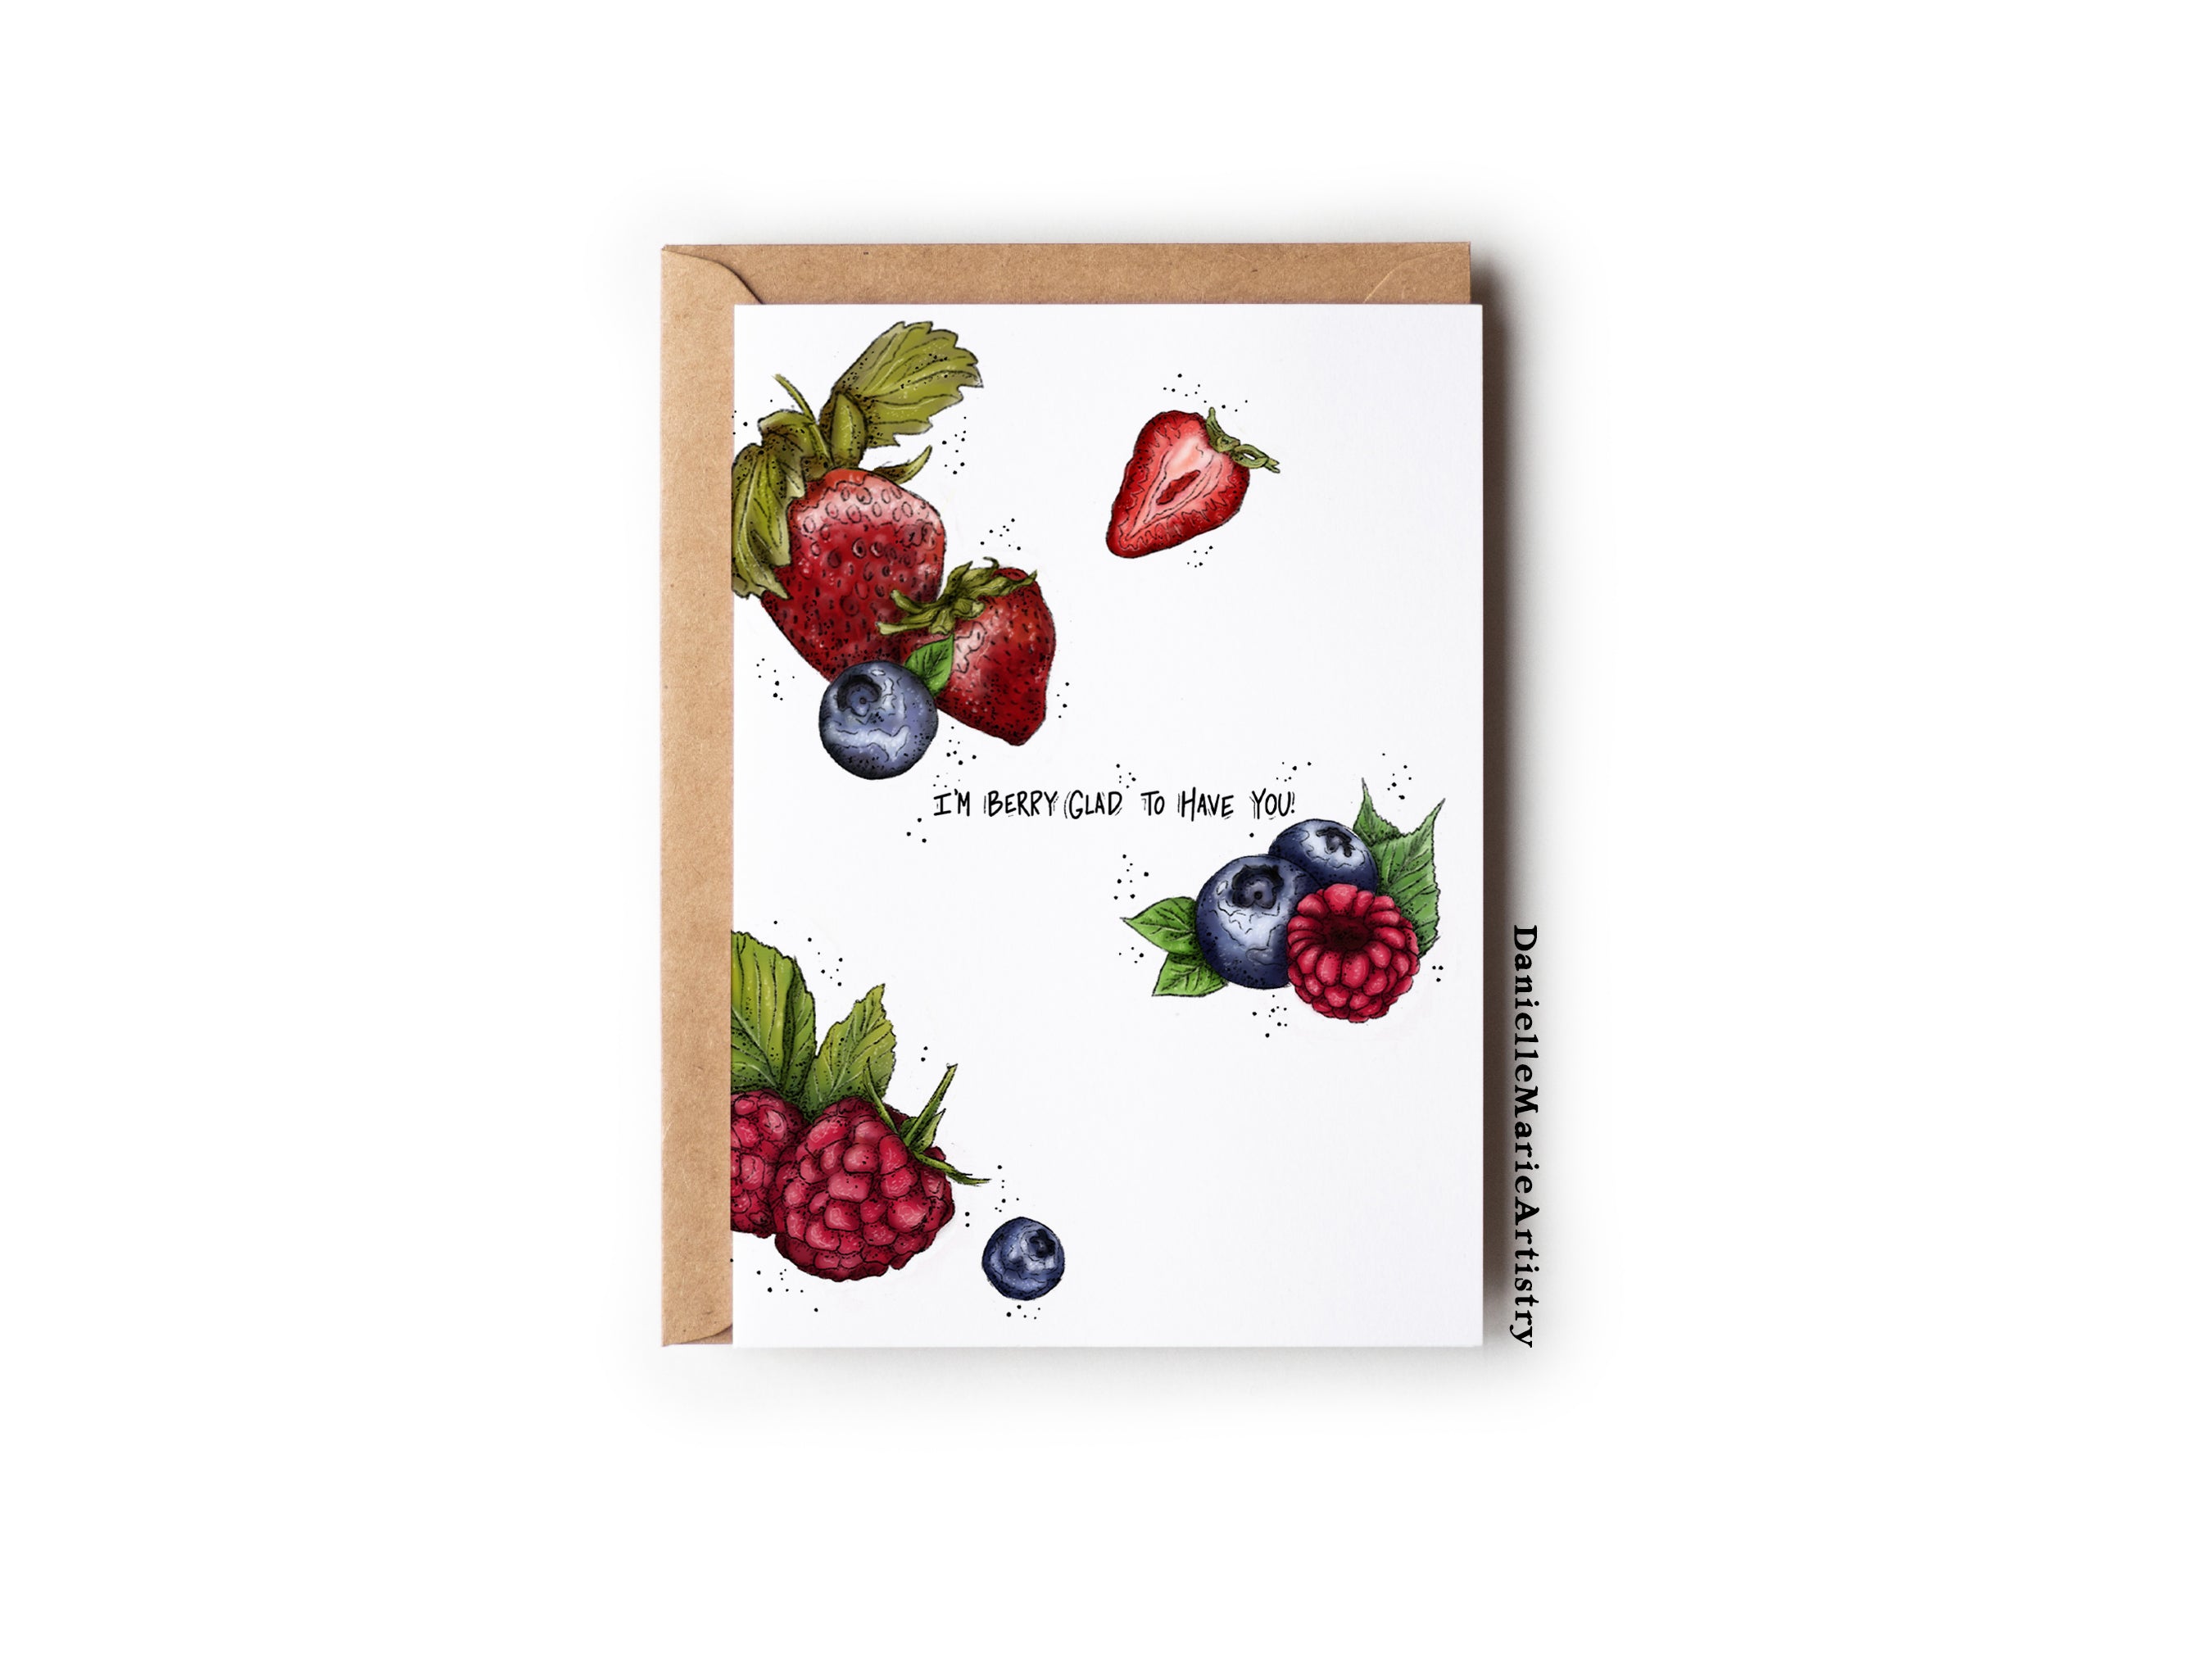 I'm Berry Glad to Have You! - Greeting Card